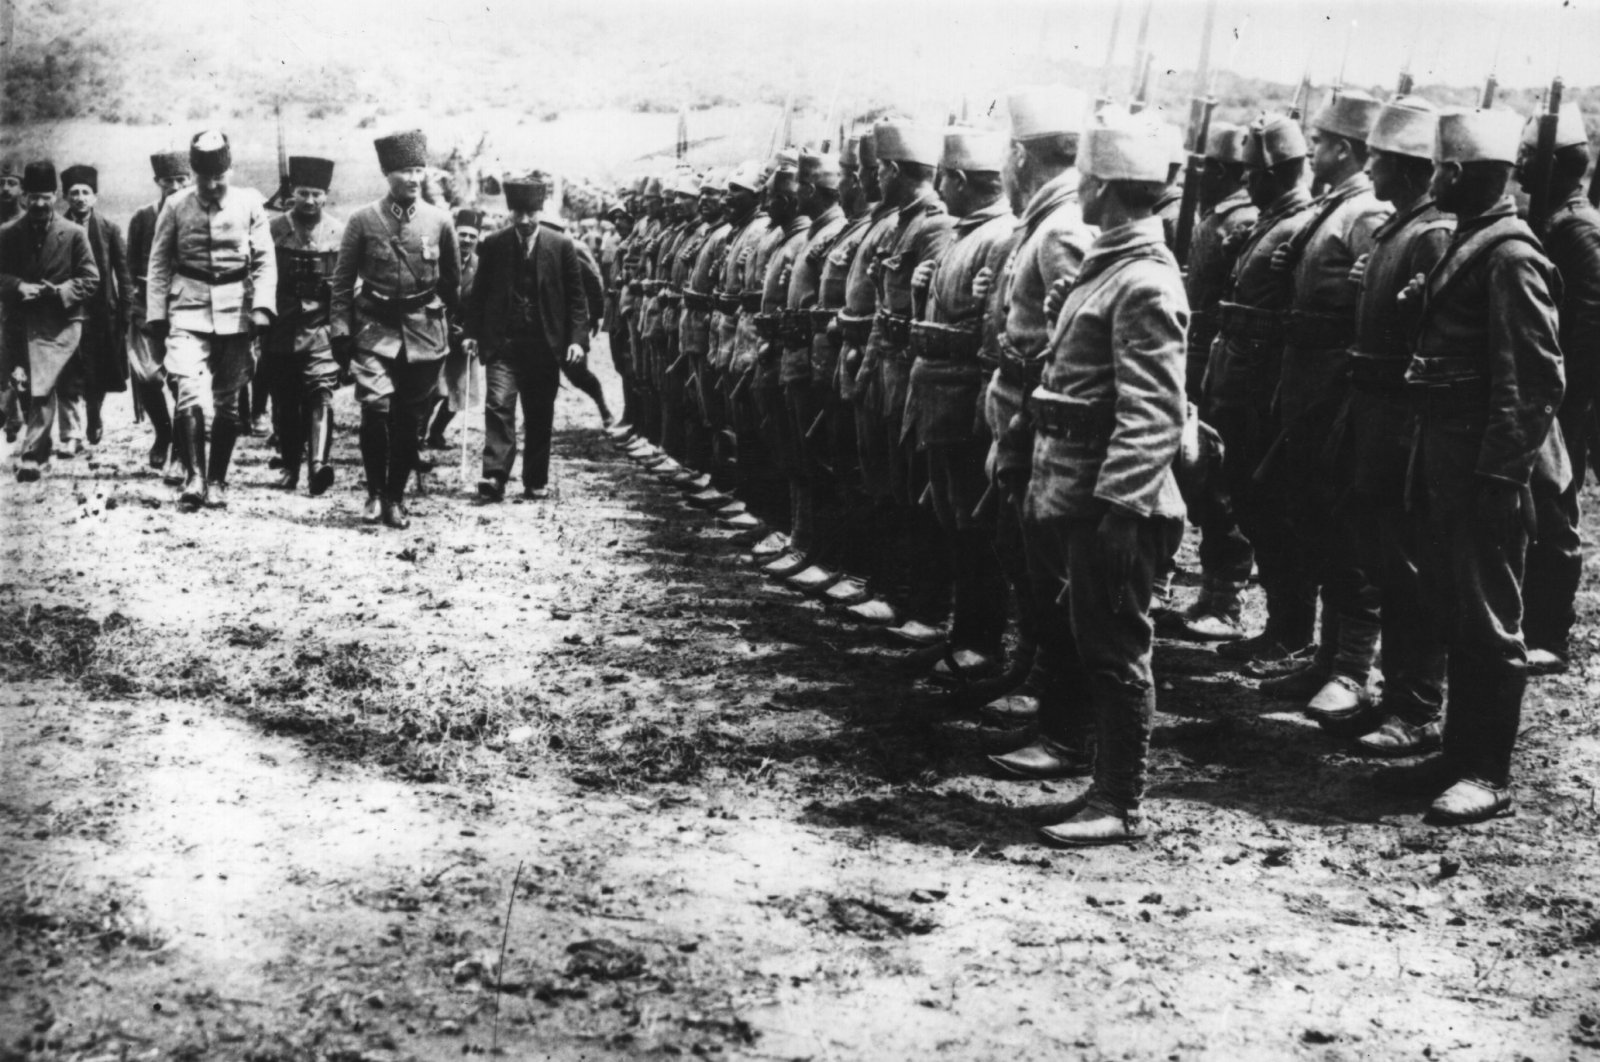 Turkish general and statesman Mustafa Kemal Atatürk reviews his troops during the War of Independence against Greece. (Getty Images Photo)